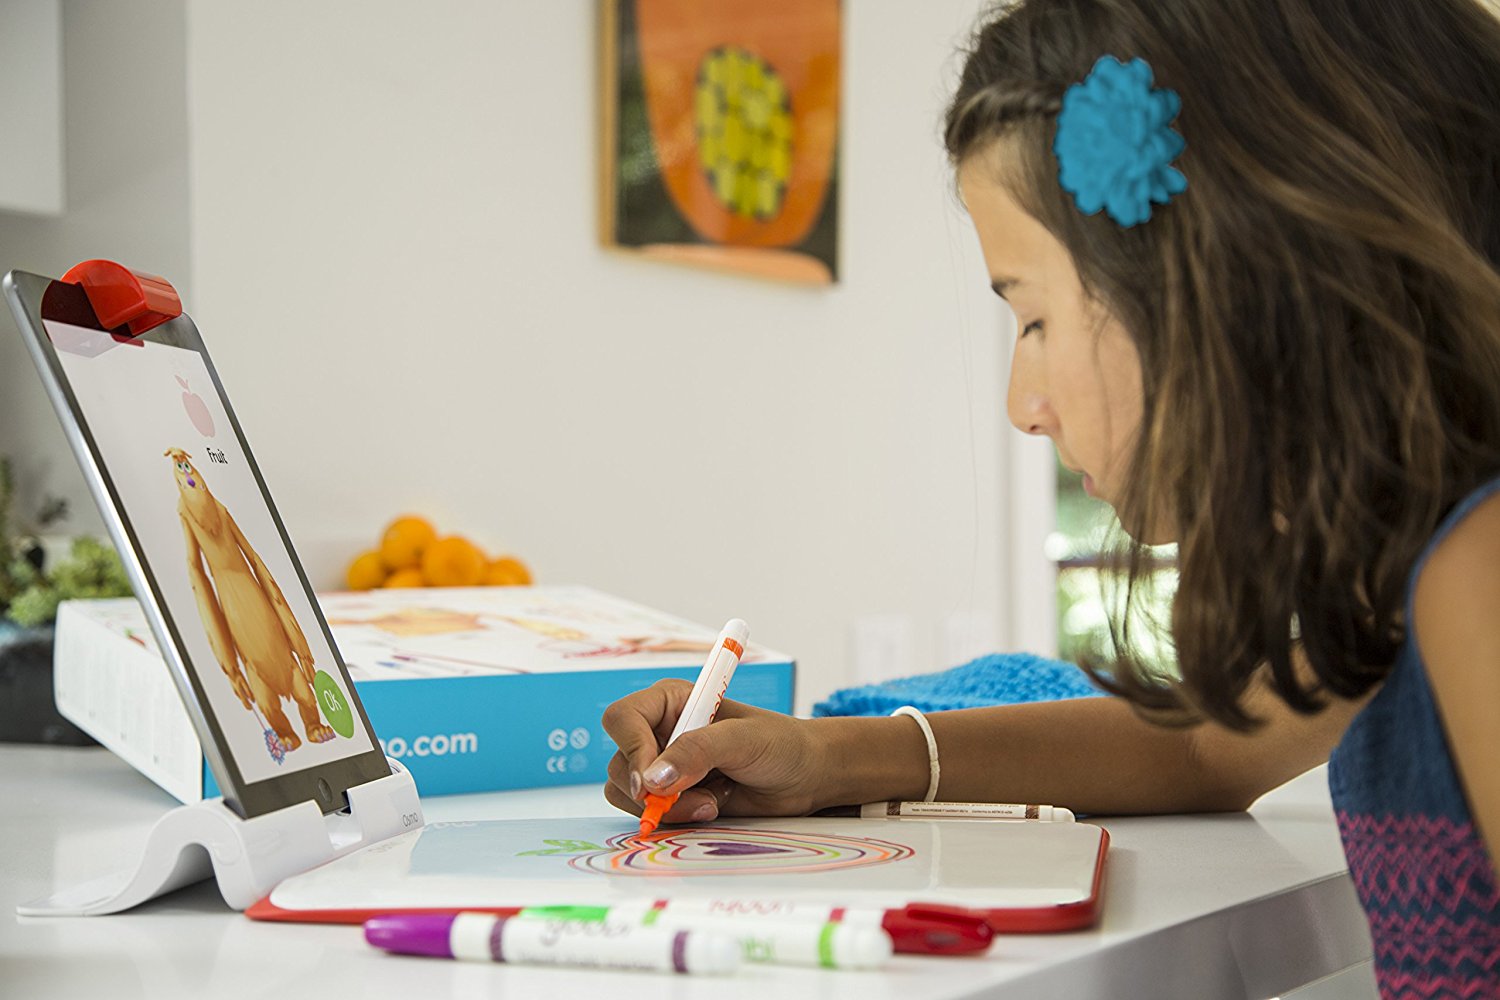 osmo creative kit with monster game